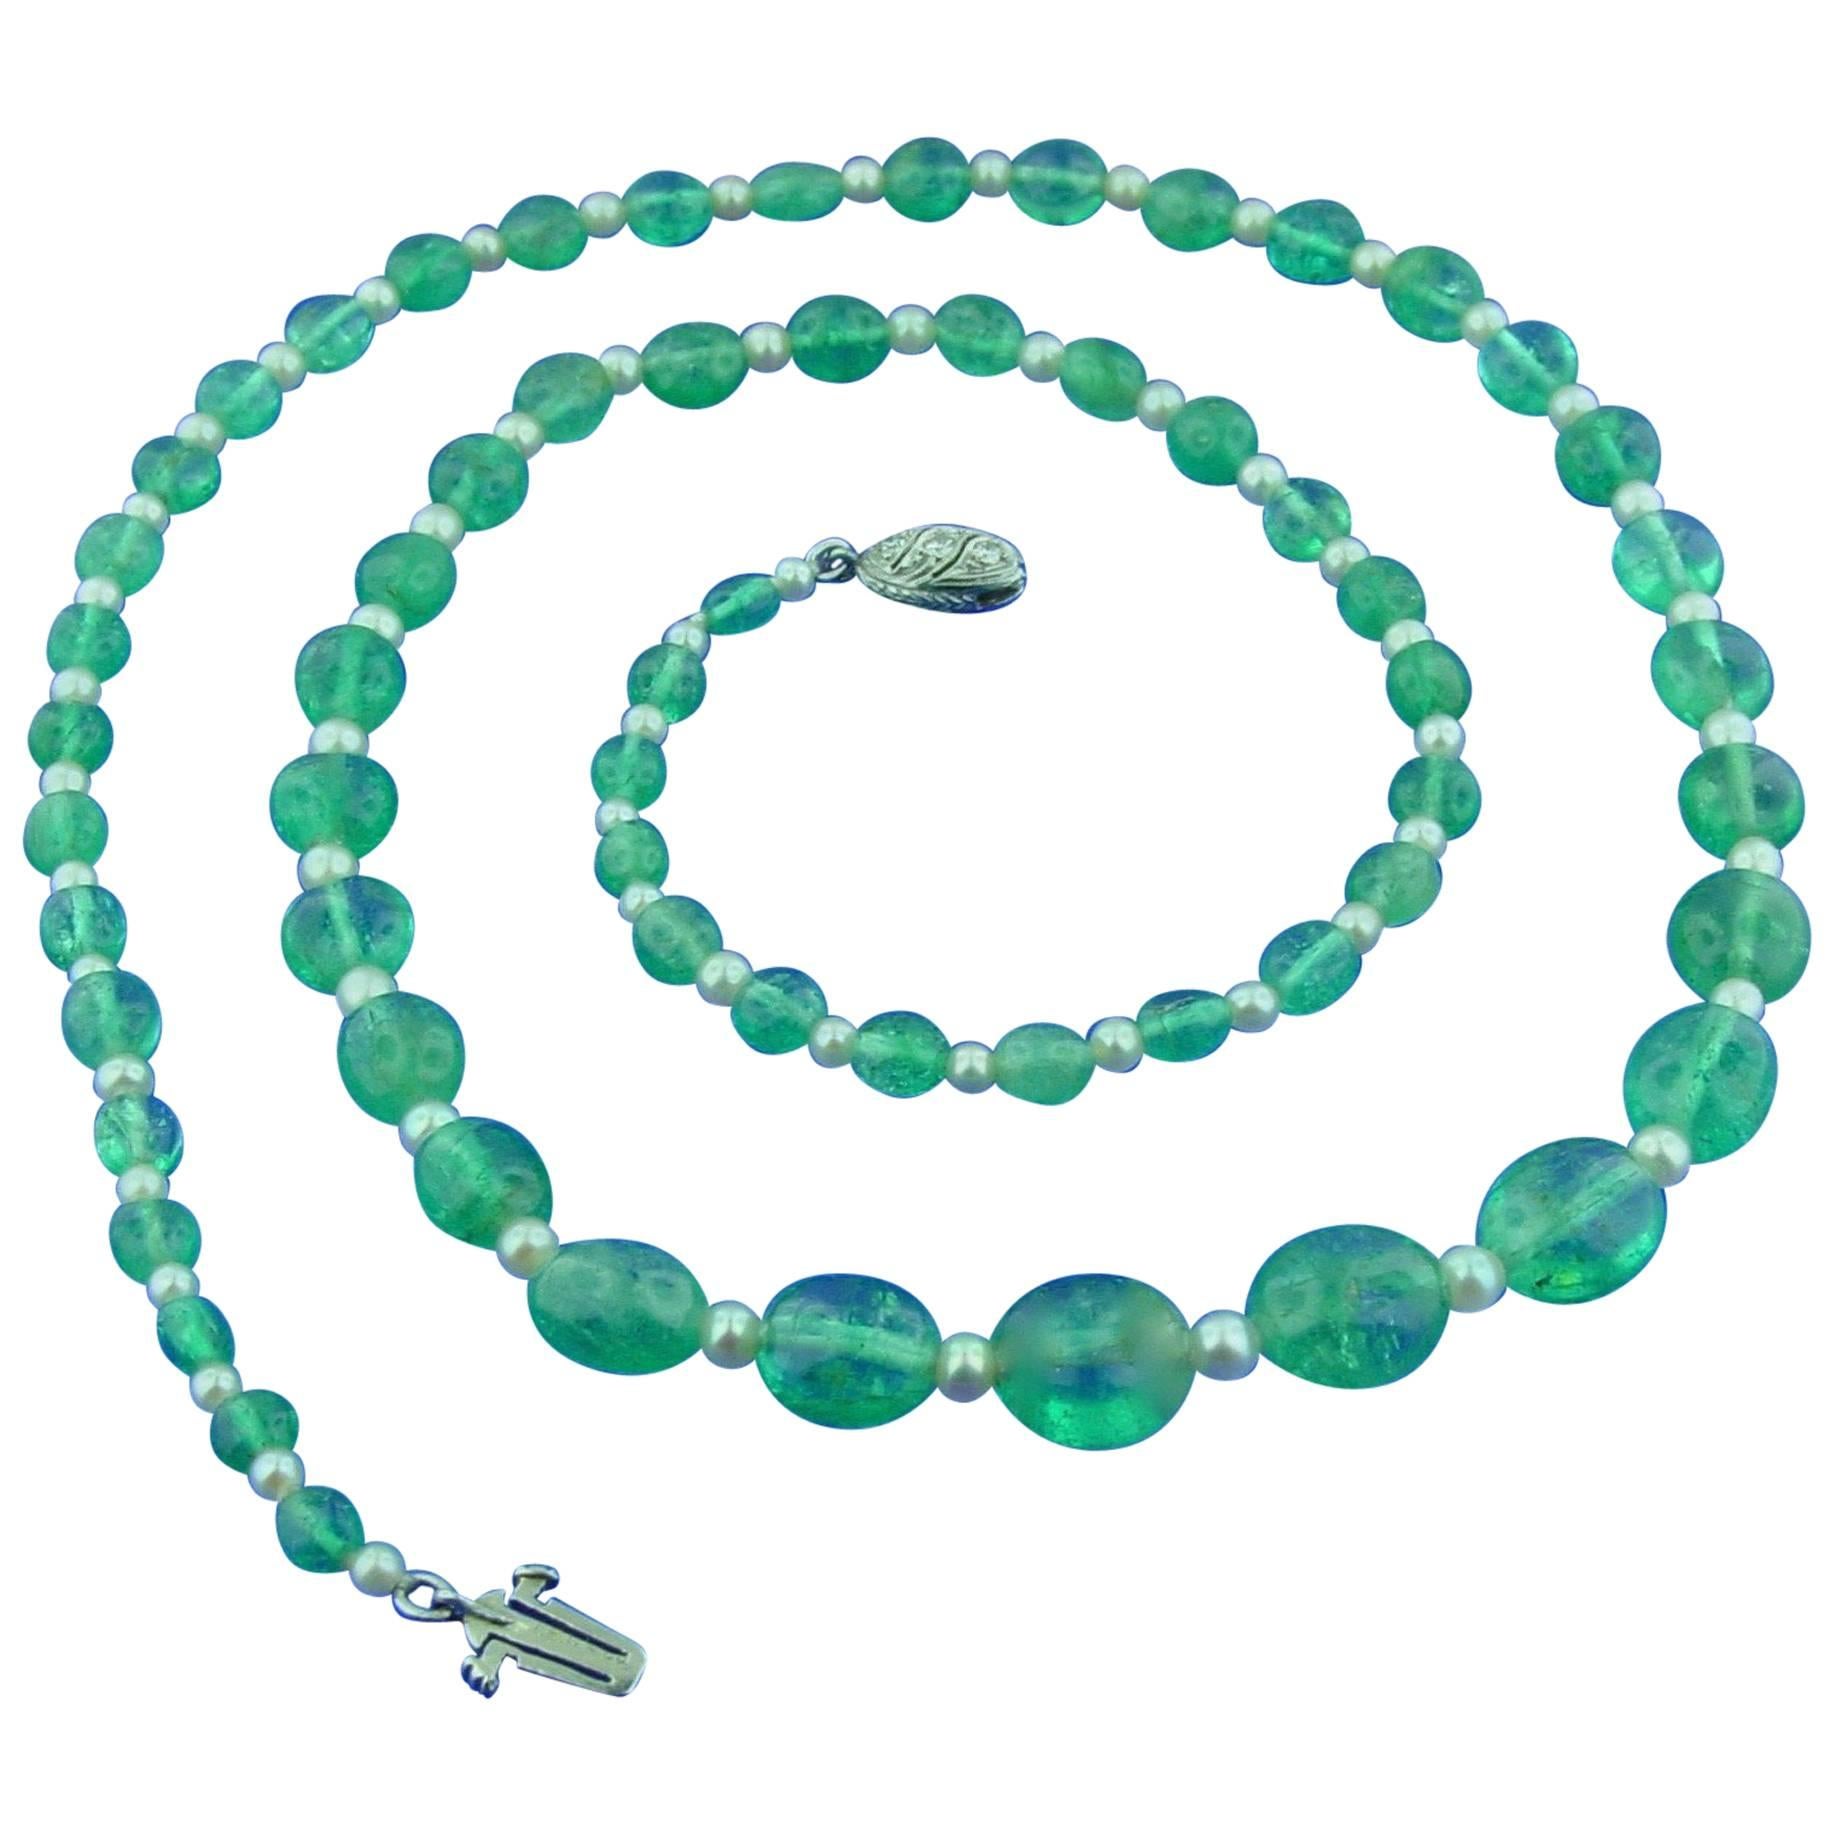 J.E. Caldwell Pearl Emerald Bead Necklace For Sale